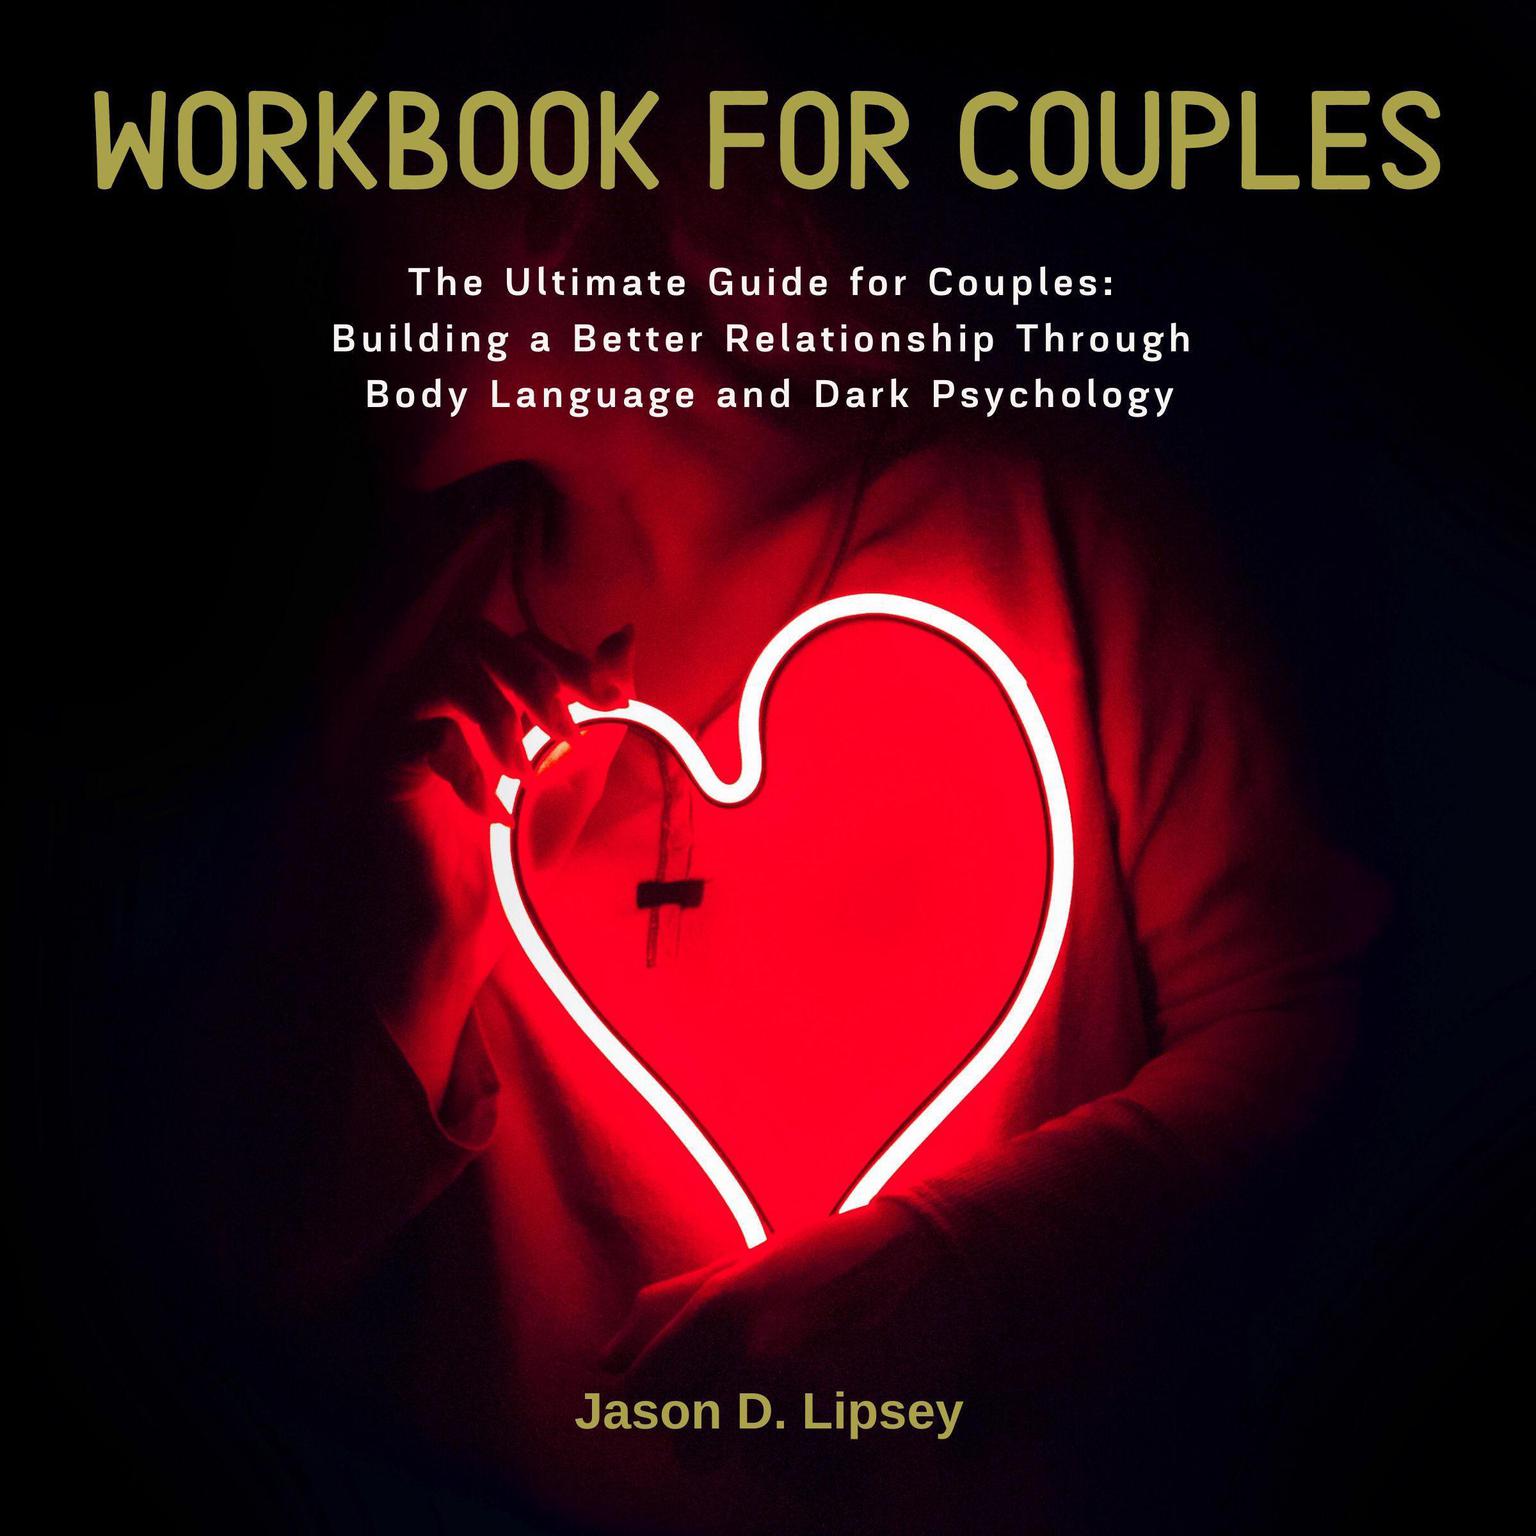 Workbook For Couple The Ultimate Guide for Couples: Building a Better Relationship Through Body Language and Dark Psychology Audiobook, by Jason D. Lipsey